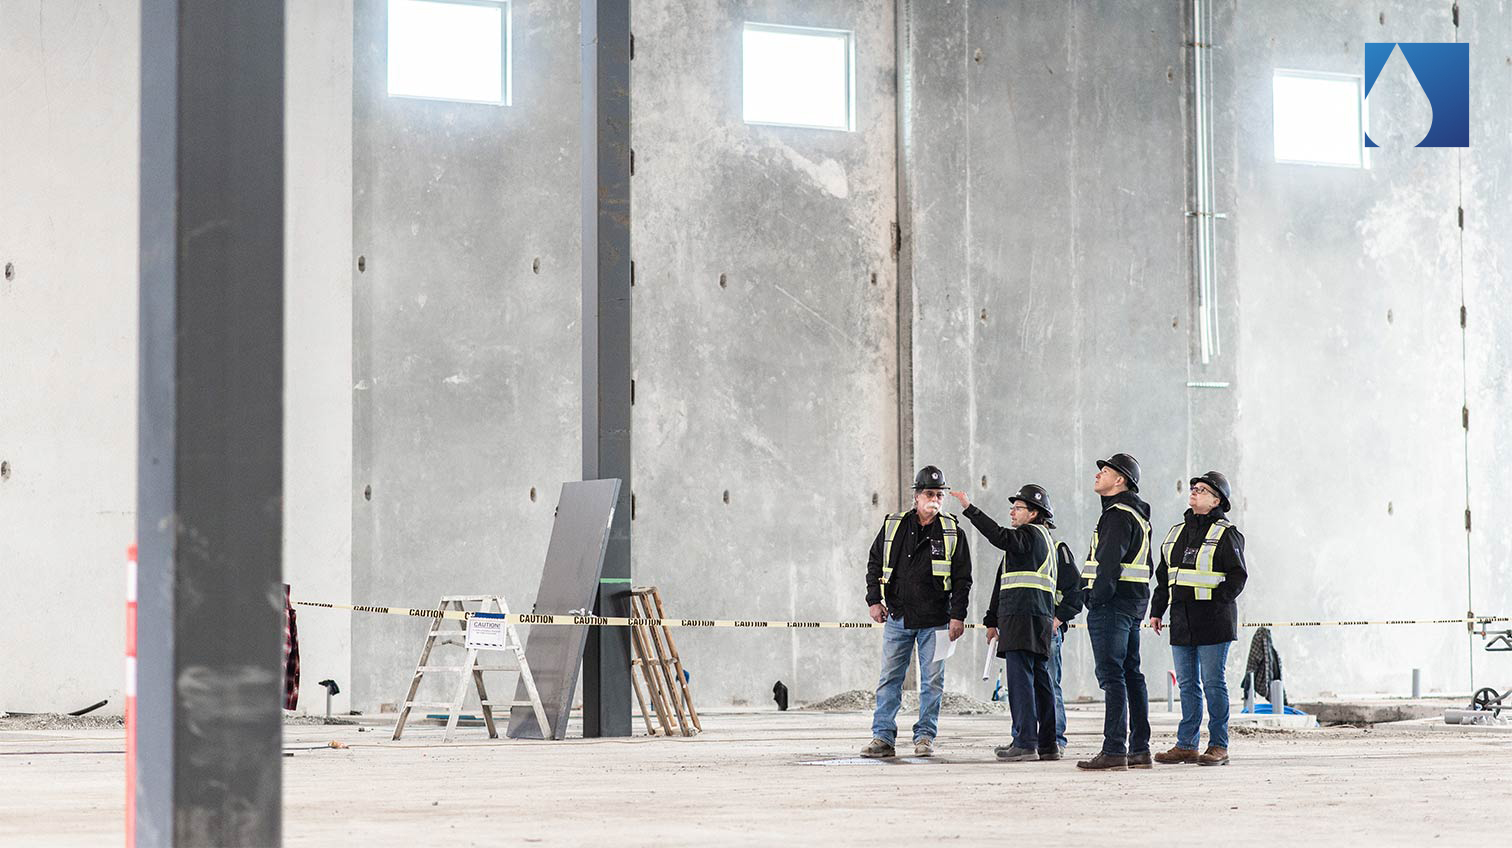 Rain City construction workers having a meeting inside an unfinished building- White Canvas Design